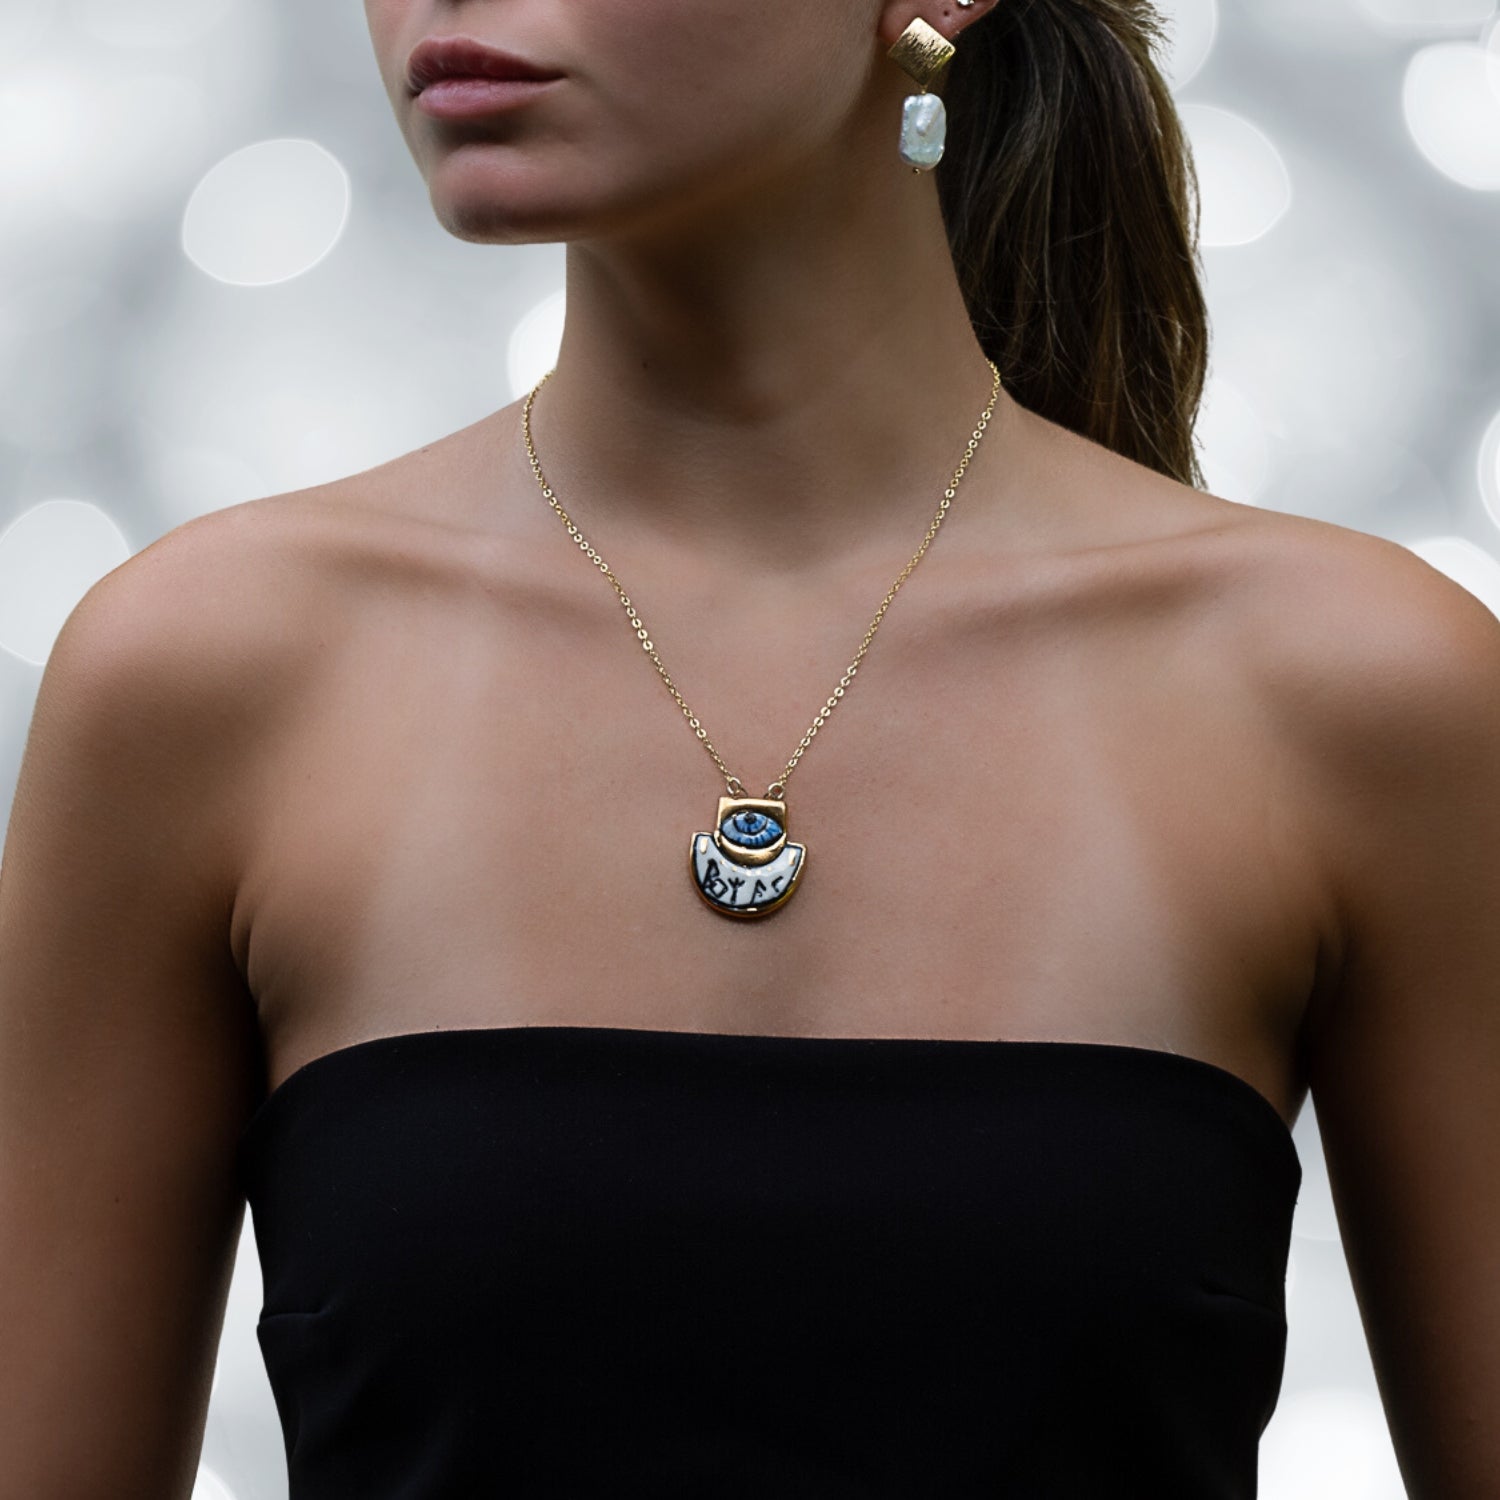 Model Wearing Unique Norse Runes Necklace - Adorned with symbols of ancient wisdom and power.